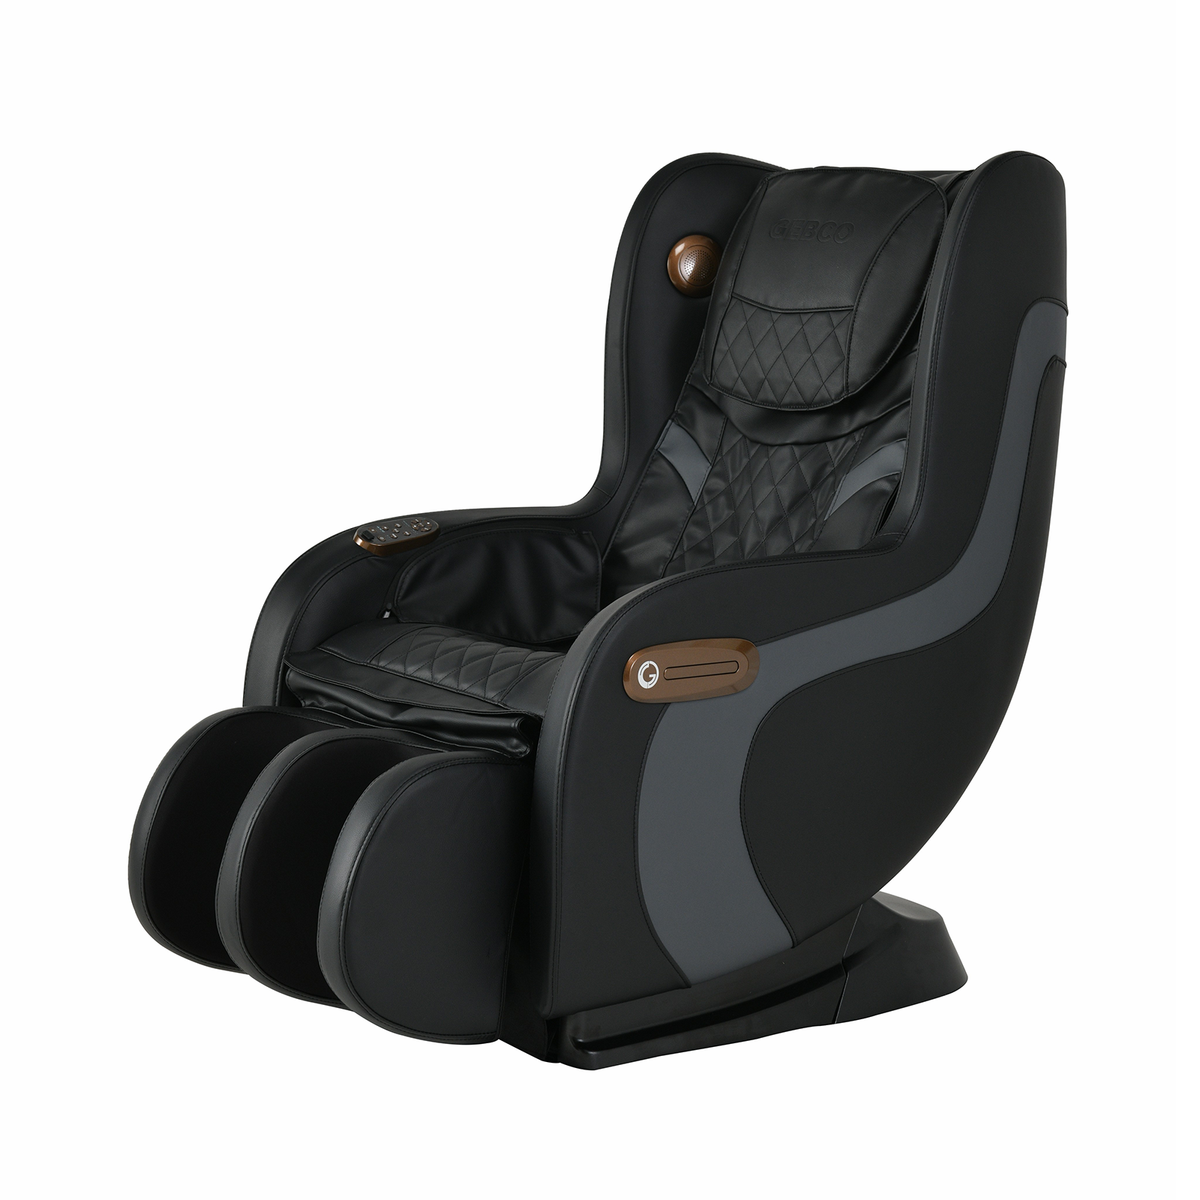 2022 GEBCO Comely SL-Track Lite Massage Chair (Black)